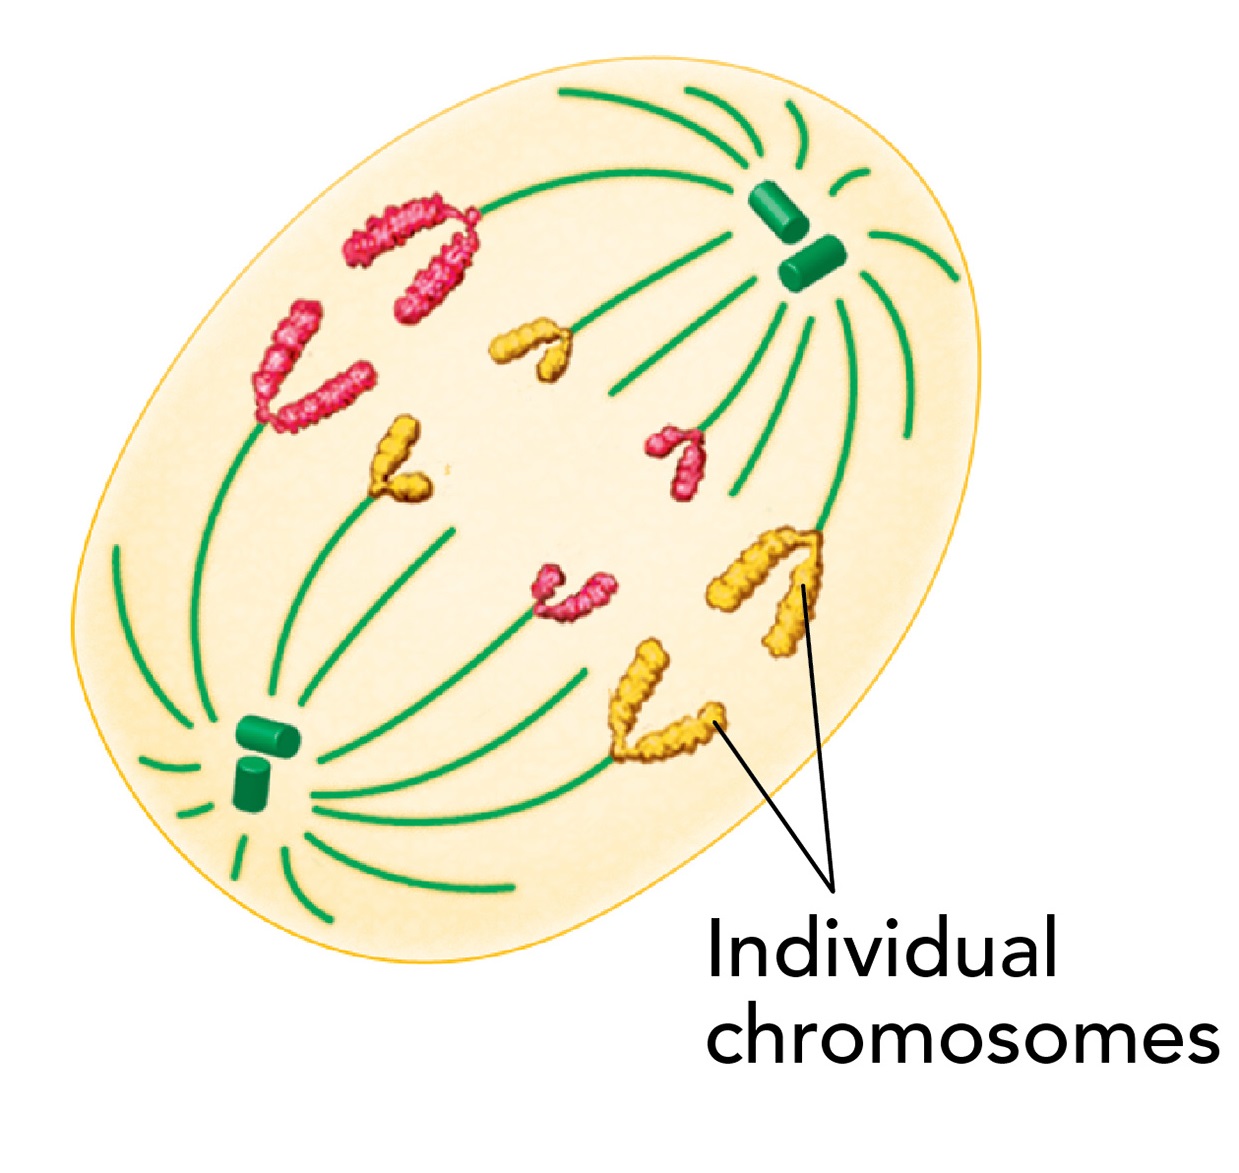 Chromosomes separate and move along spindle fibers to opposite ends of the cell.